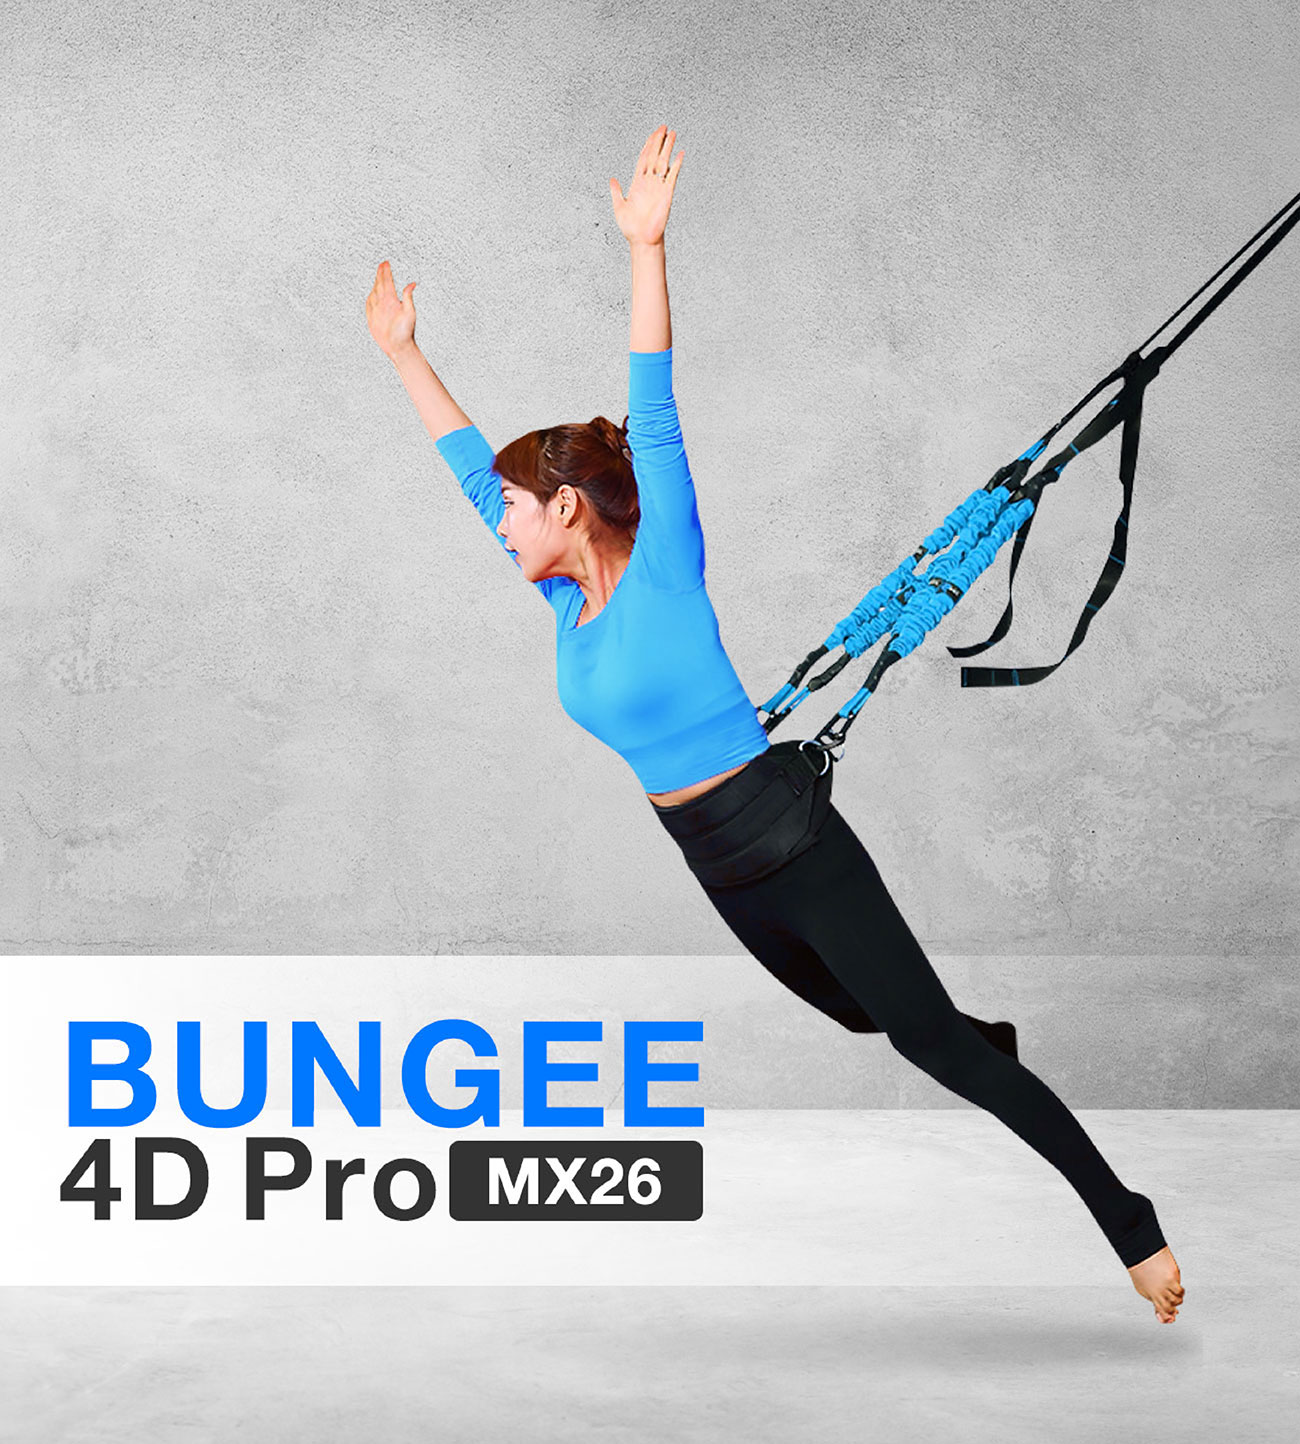 Bungee 4DPro